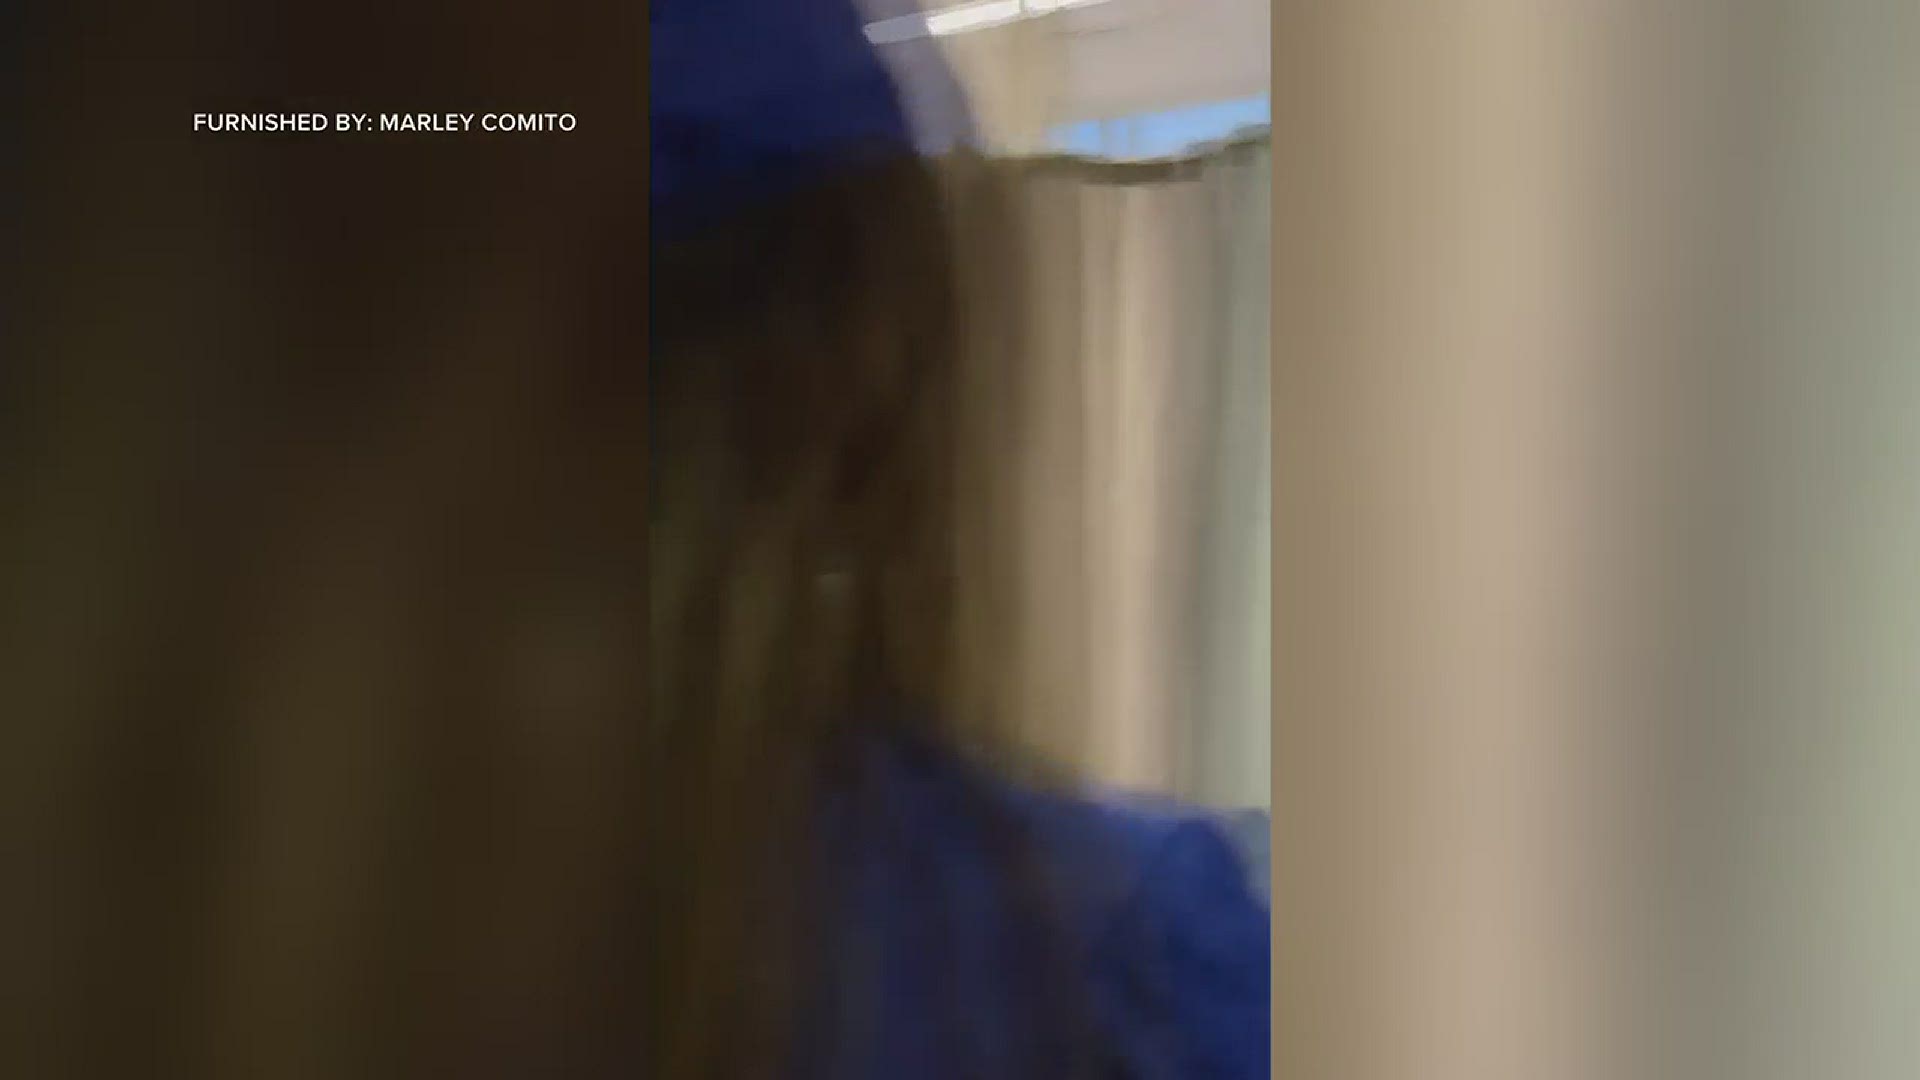 The grandmother of a soon-to-be Hopkins High School graduate fell and broke her pelvis, and couldn't travel to MN for the ceremony. So Marley Comito went to her.